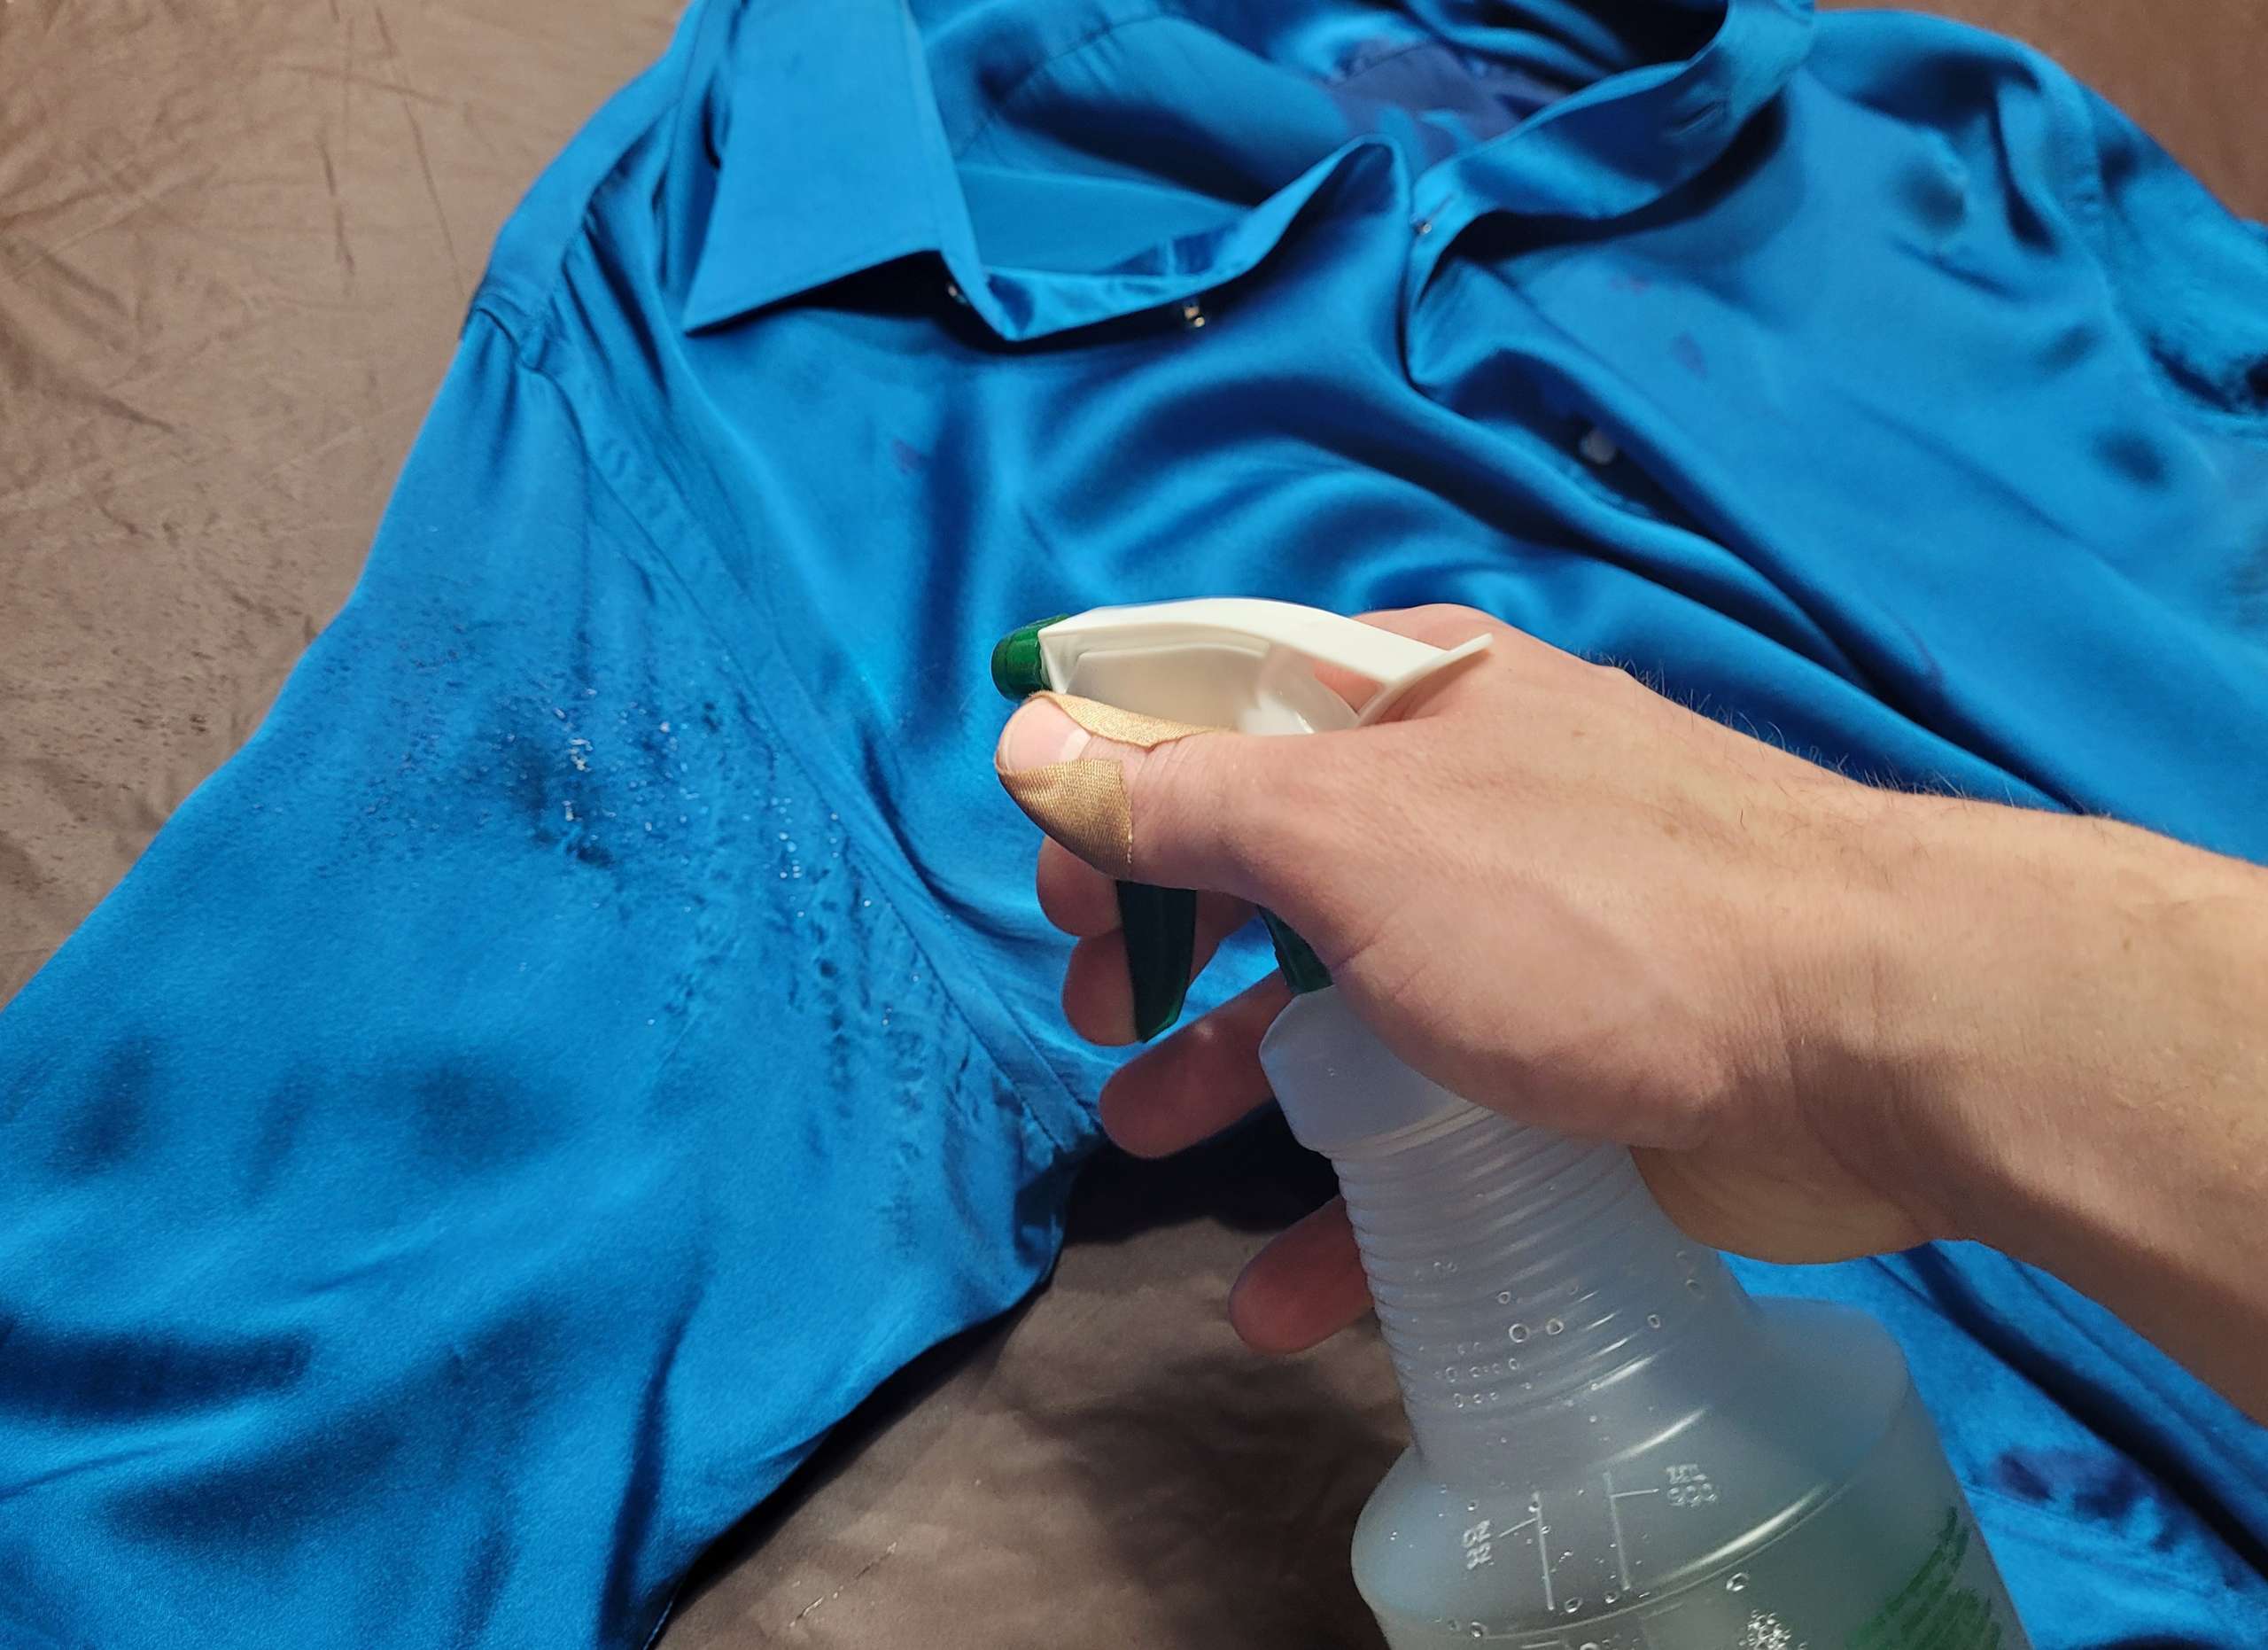 photo of a man spraying cleaning solution on sweat stains on a silk shirt